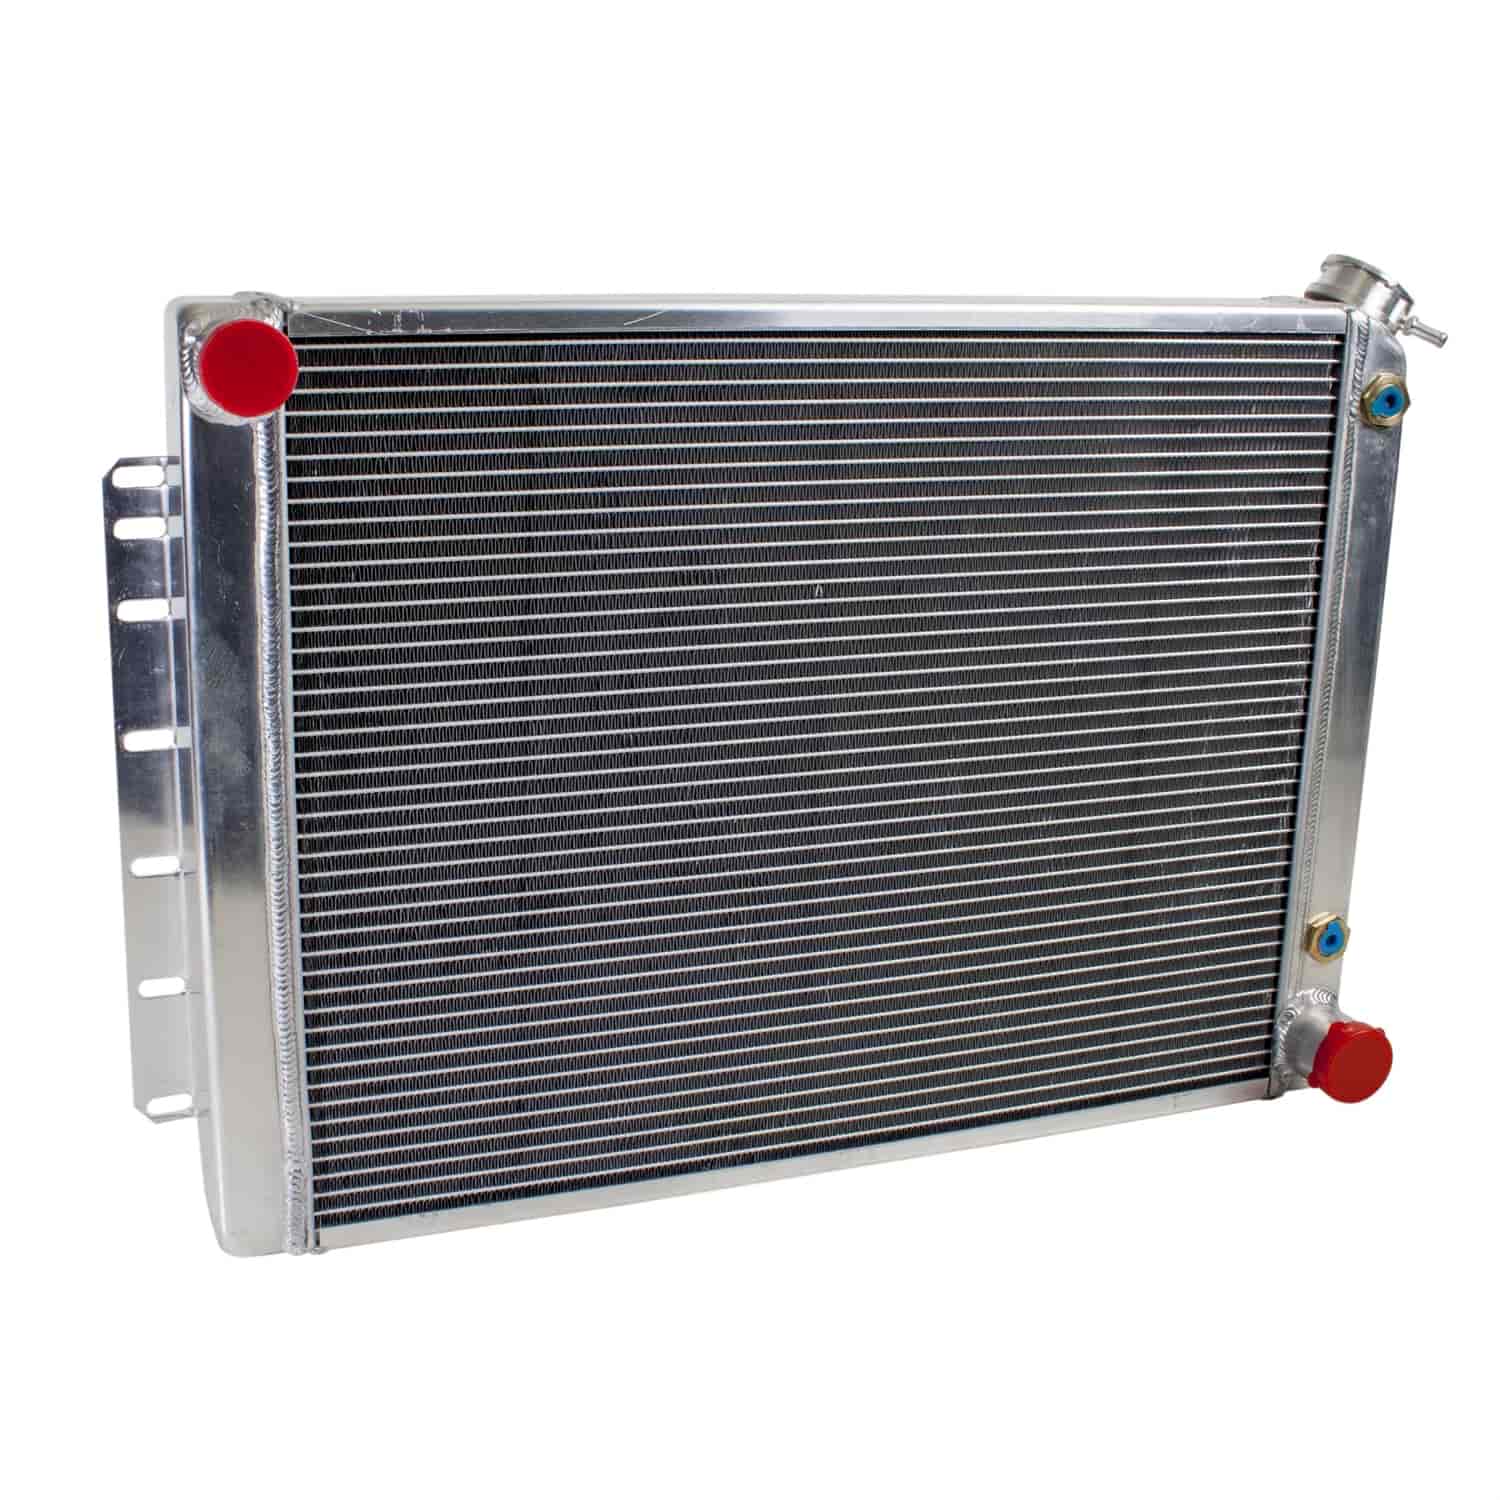 PerformanceFit Radiator for GM 1959-1970 B Body with Transmission Cooler